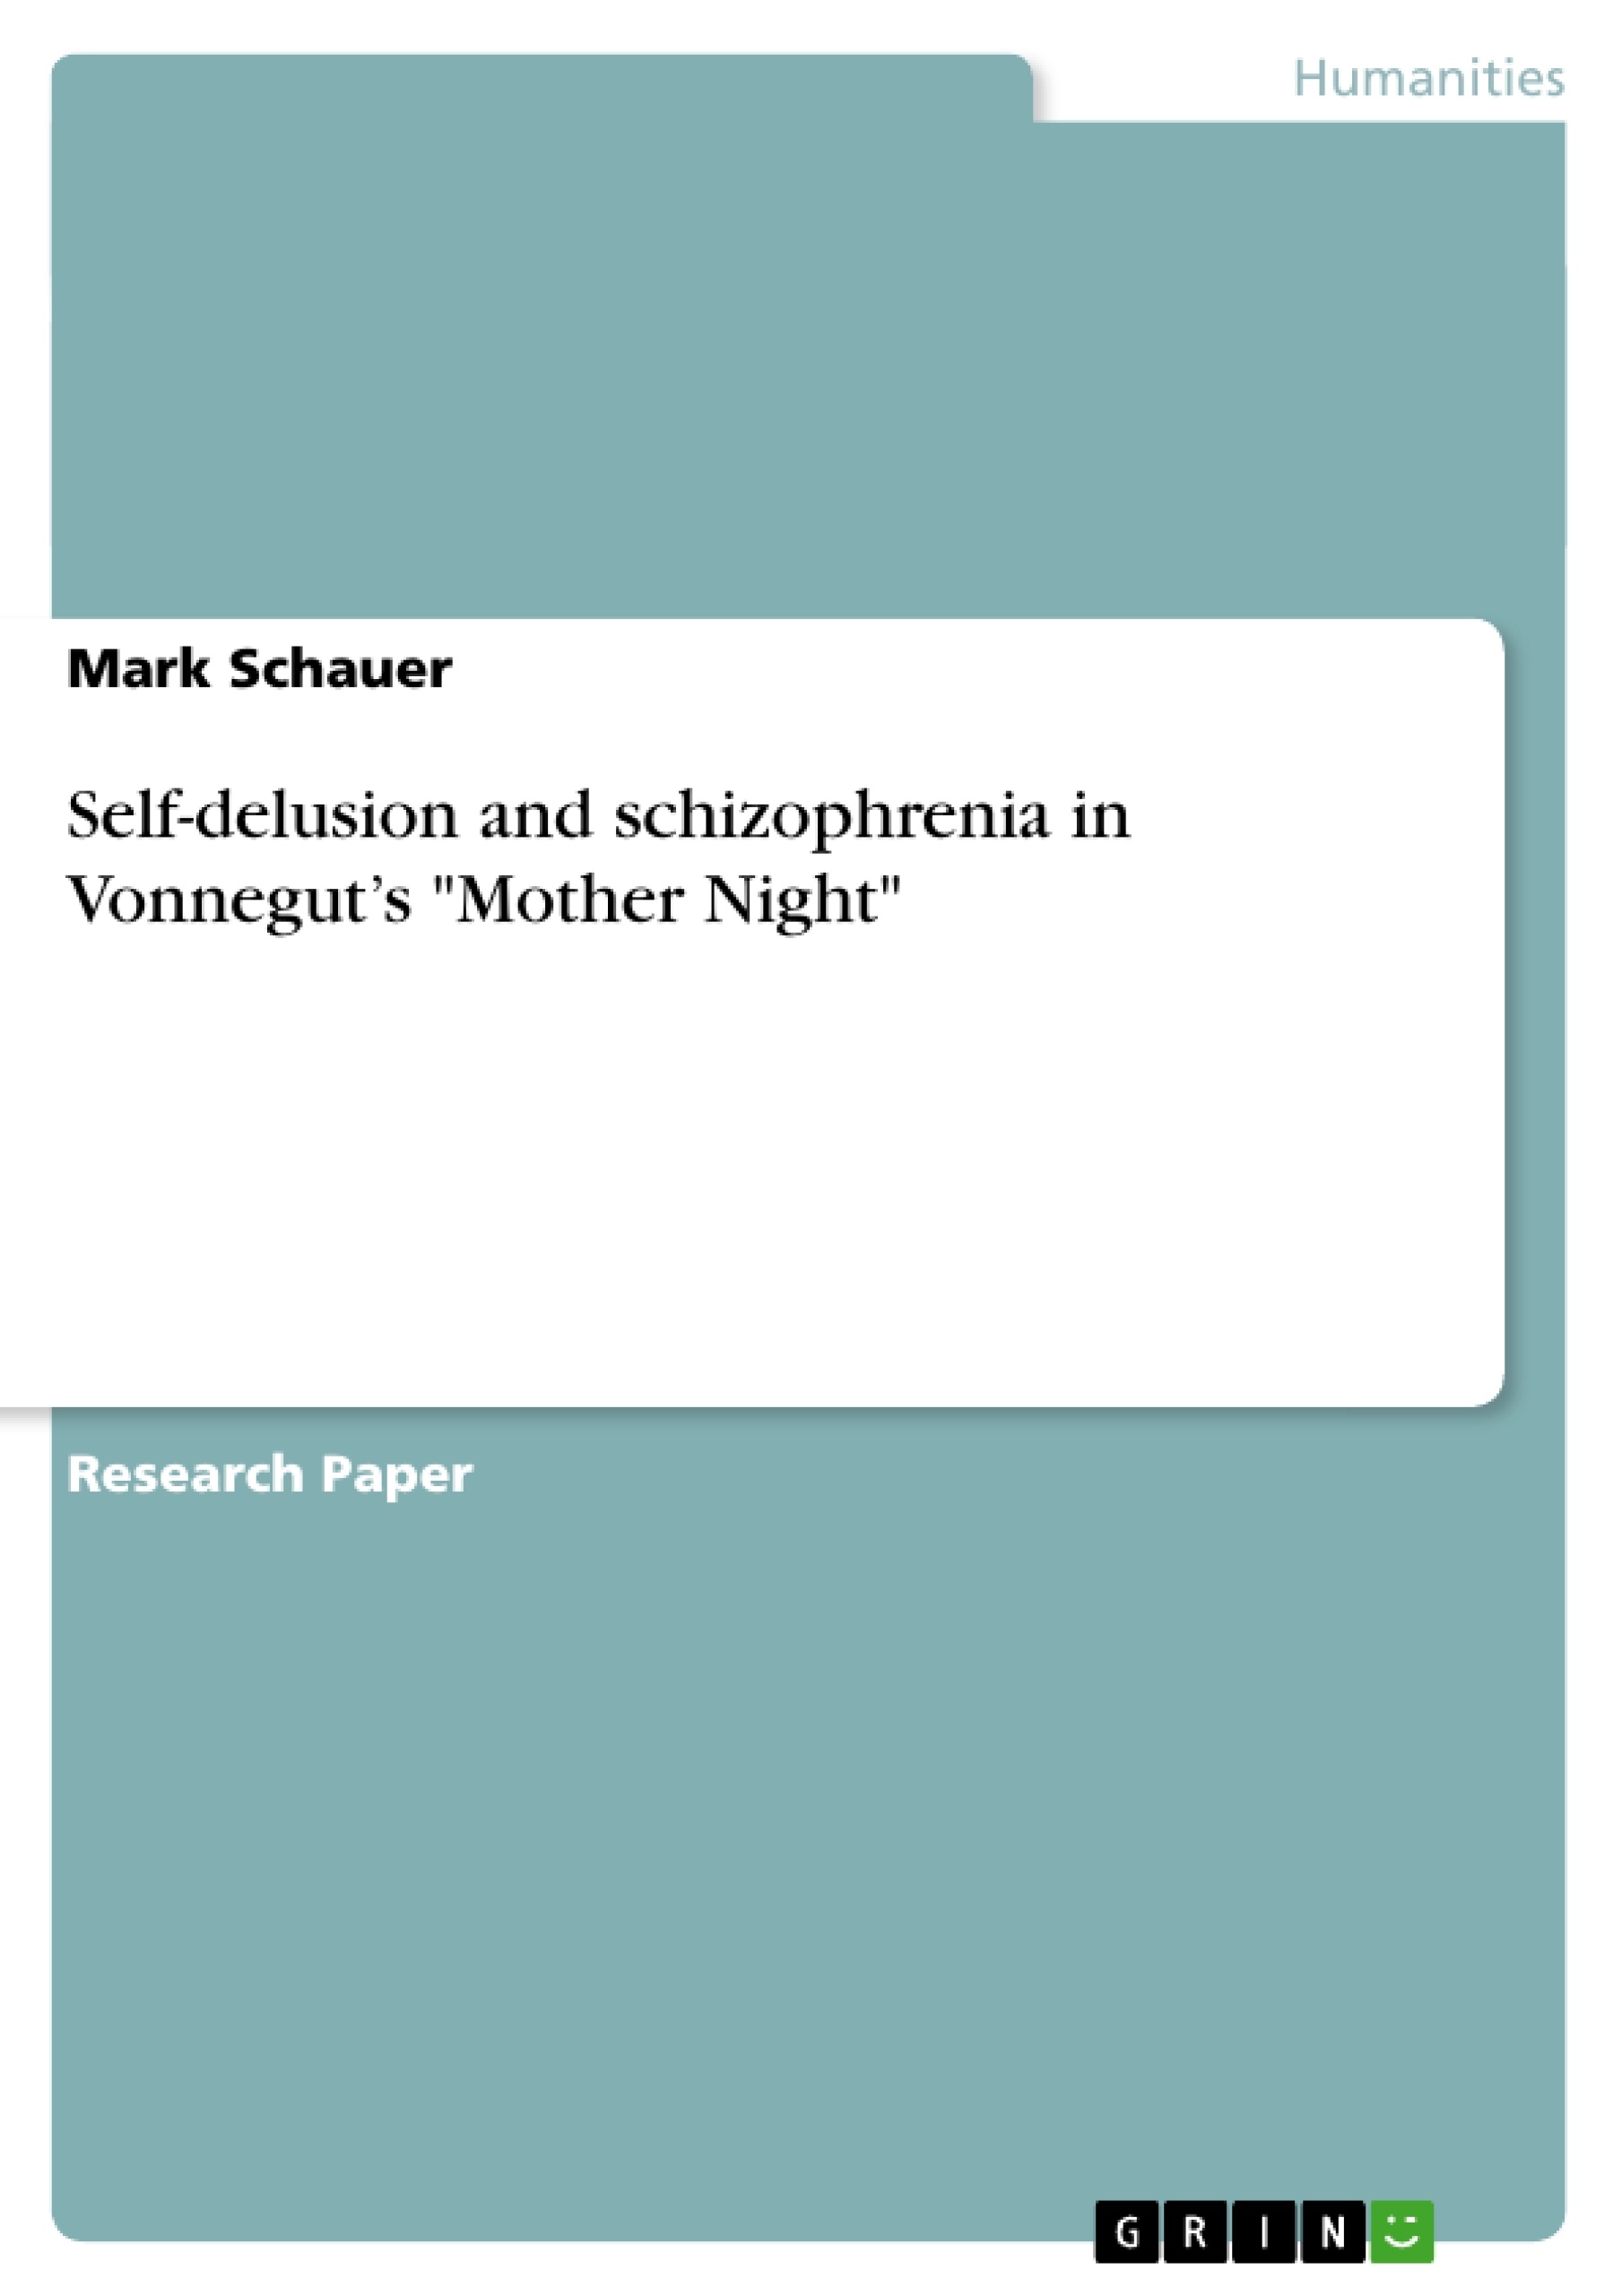 Title: Self-delusion and schizophrenia in Vonnegut’s "Mother Night"